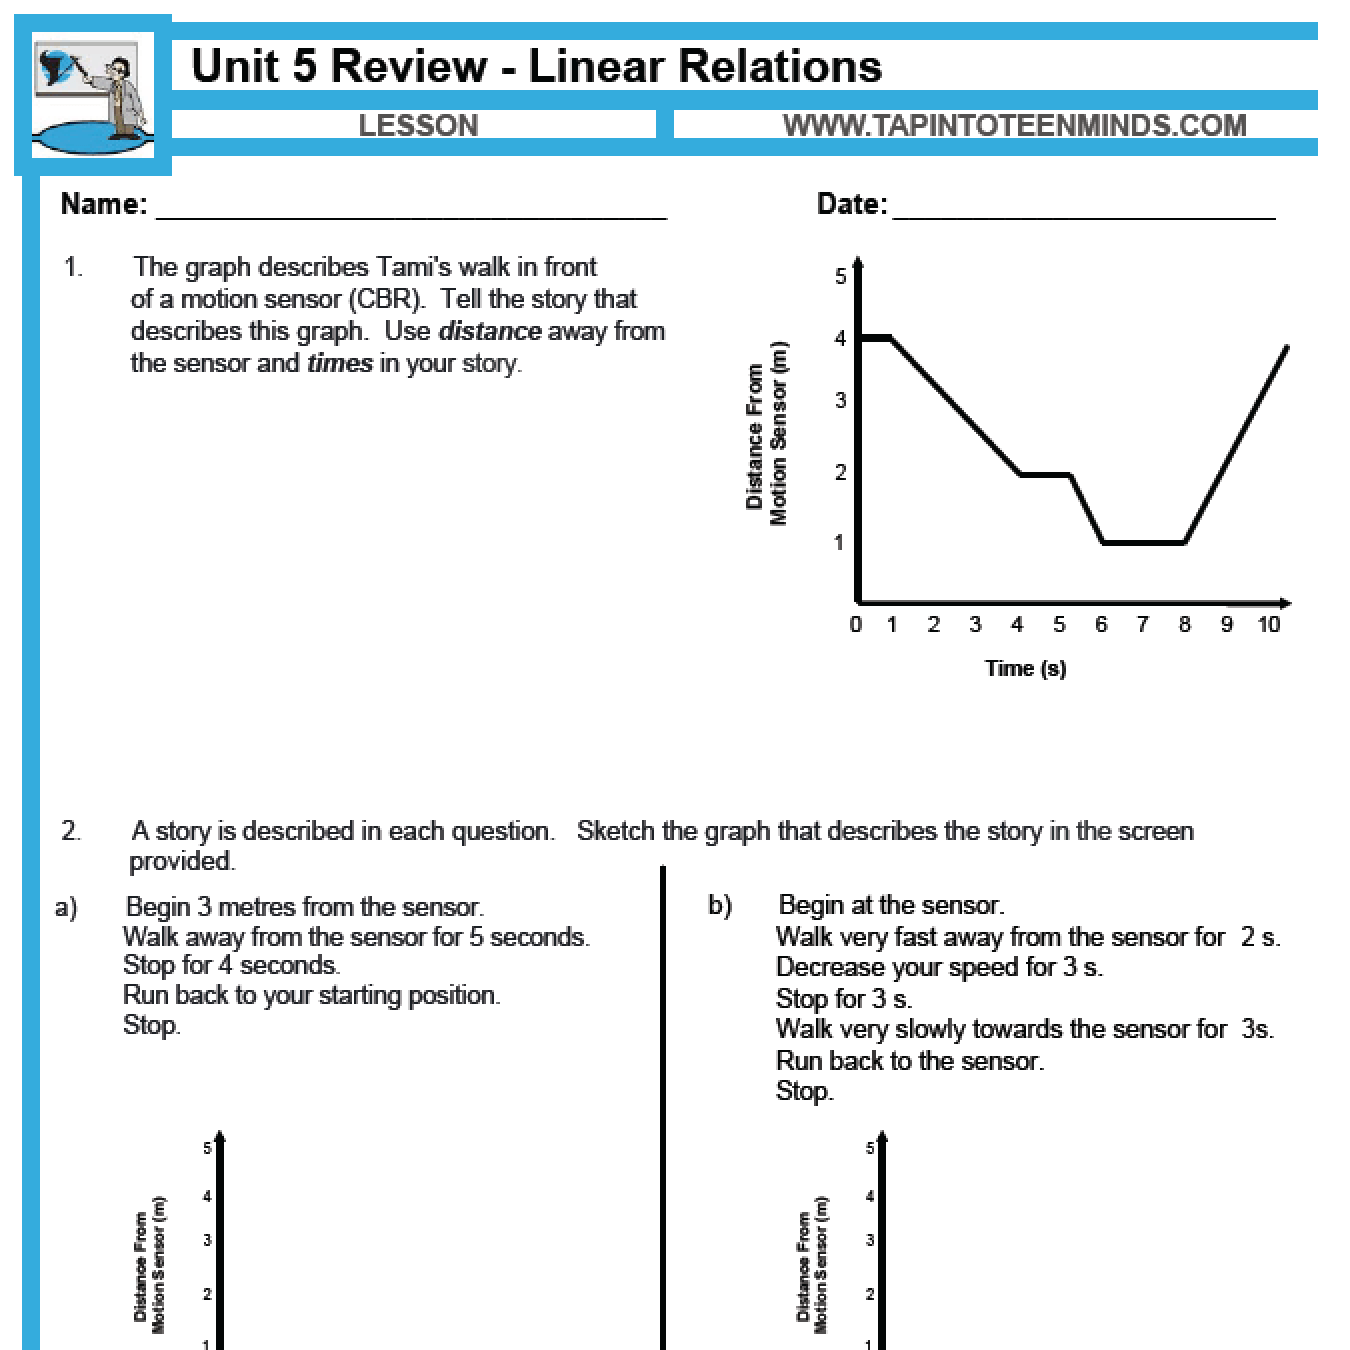 5.11 – Linear Relations Unit Review